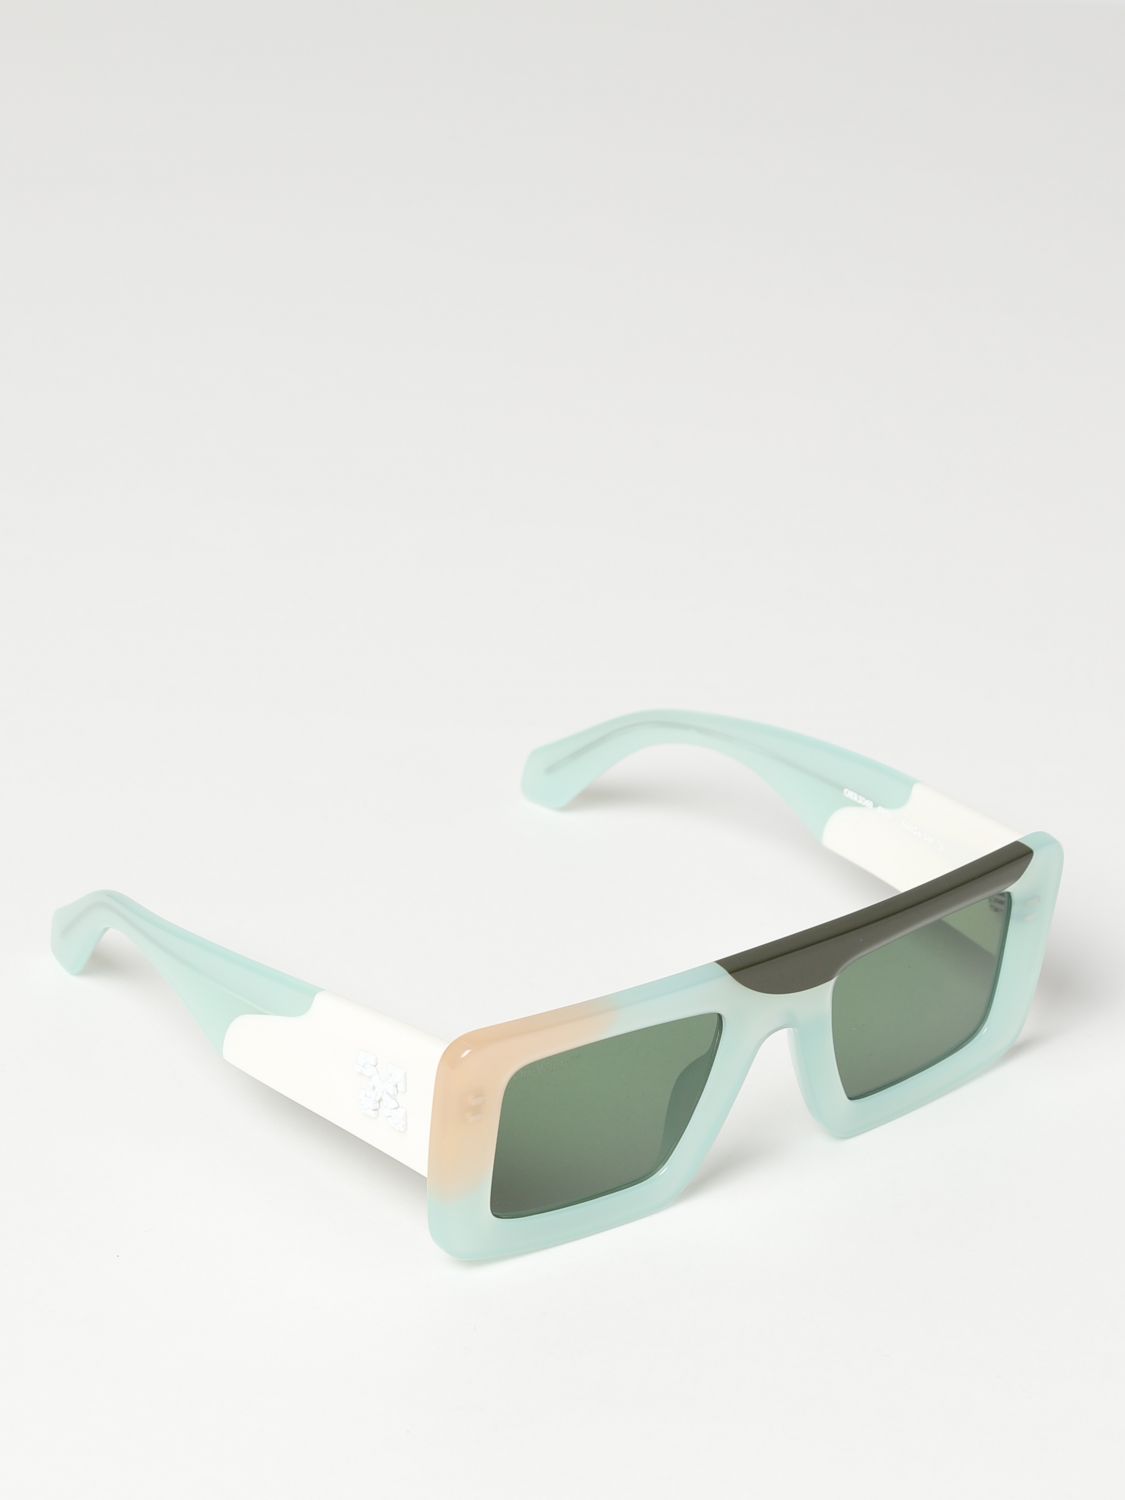 Off-White Outlet: acetate sunglasses - Blue  Off-White sunglasses OERI064  online at